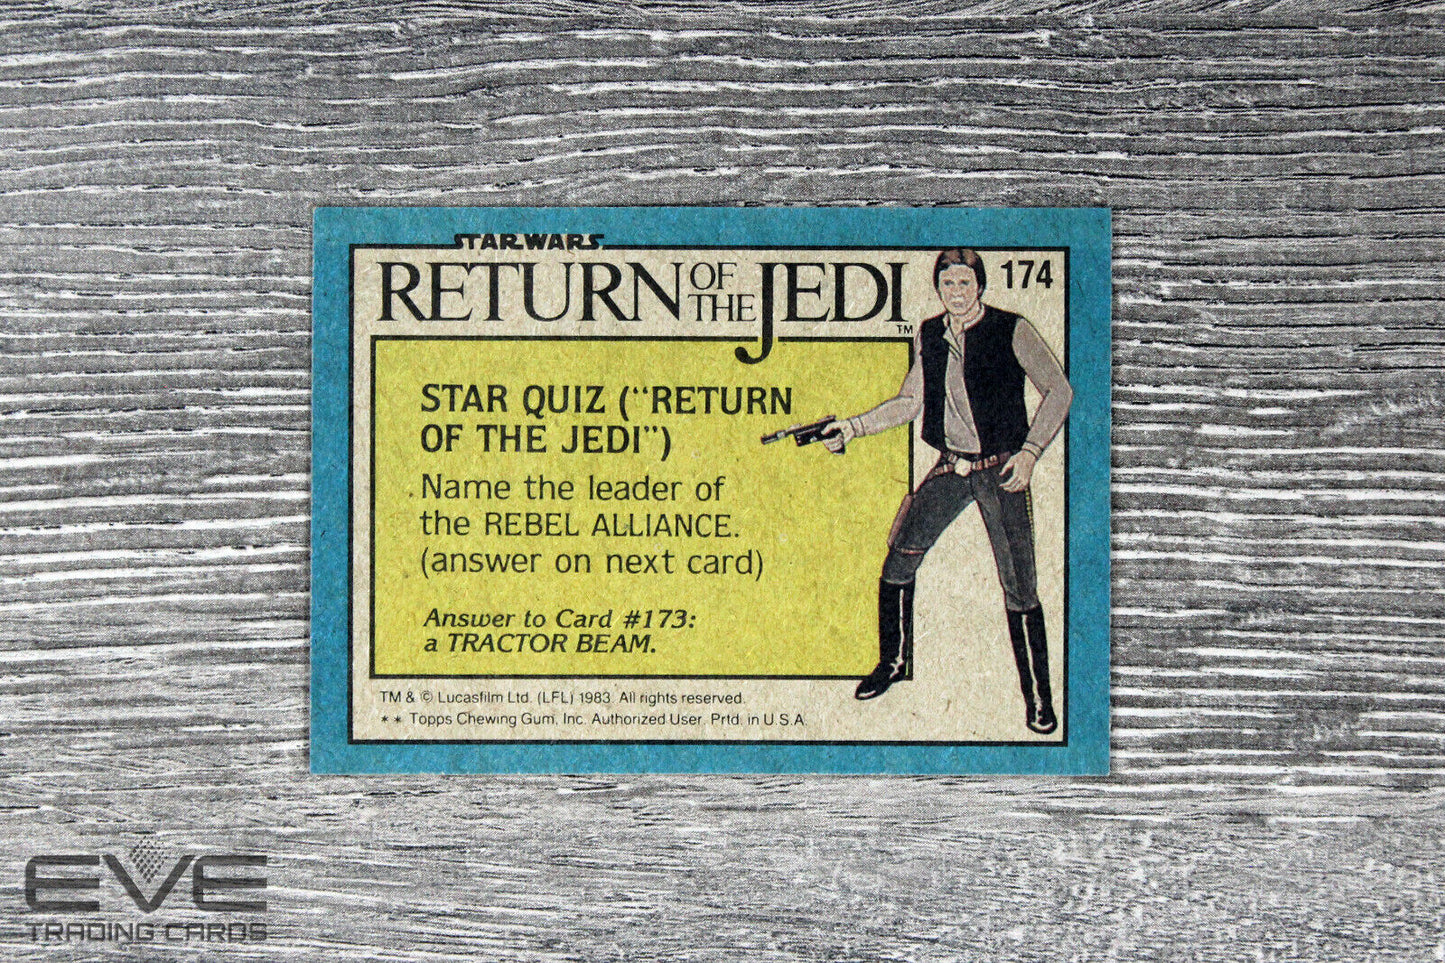 1983 Topps Vintage Star Wars Return of the Jedi S2 Card #174 A Monstrous Guest!